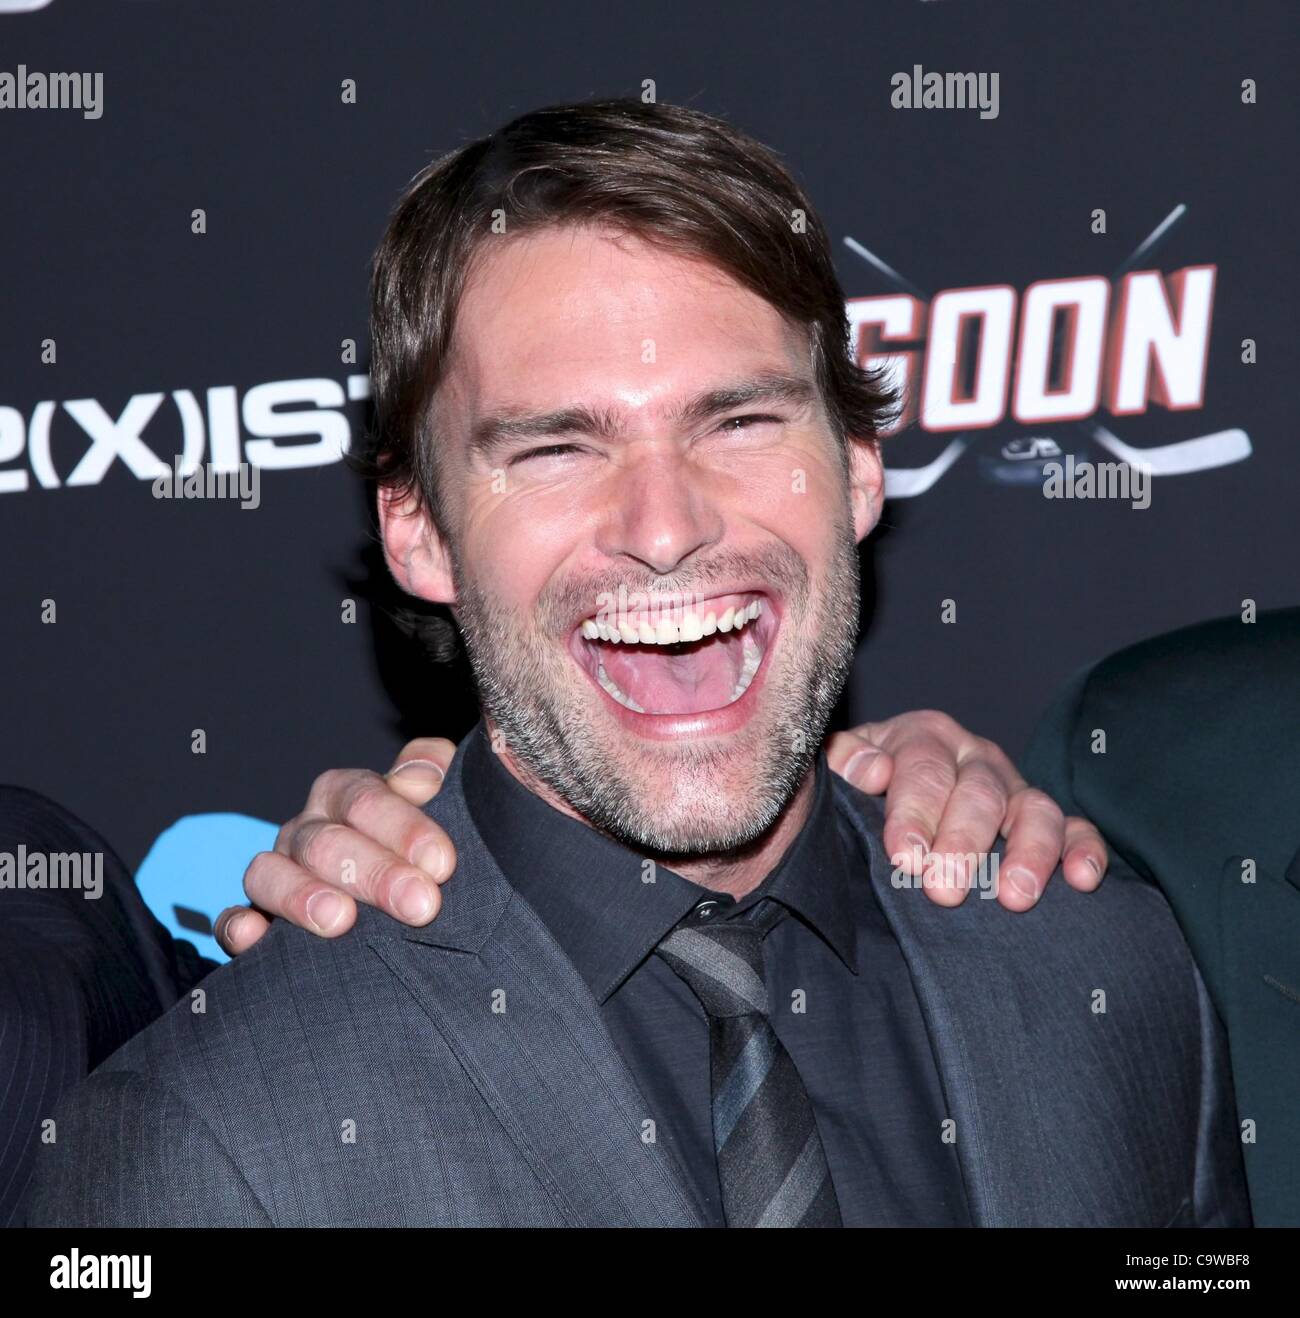 Seann William Scott at arrivals for GOON Premiere, School of Visual Arts (SVA) Theater, New York, NY February 23, 2012. Photo By: Andres Otero/Everett Collection Stock Photo